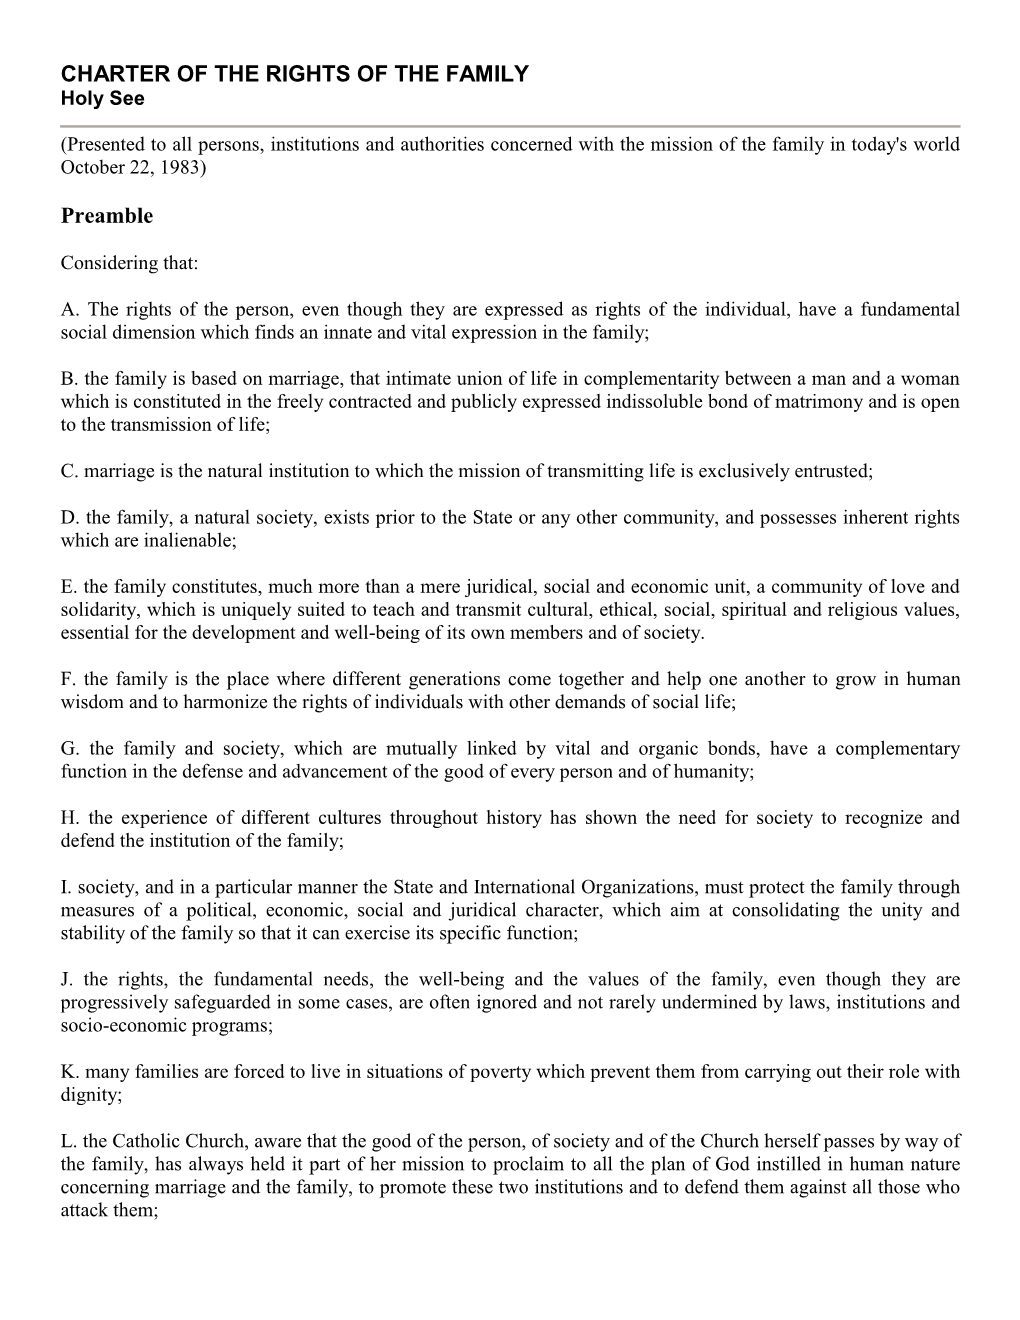 CHARTER of the RIGHTS of the FAMILY Holy See